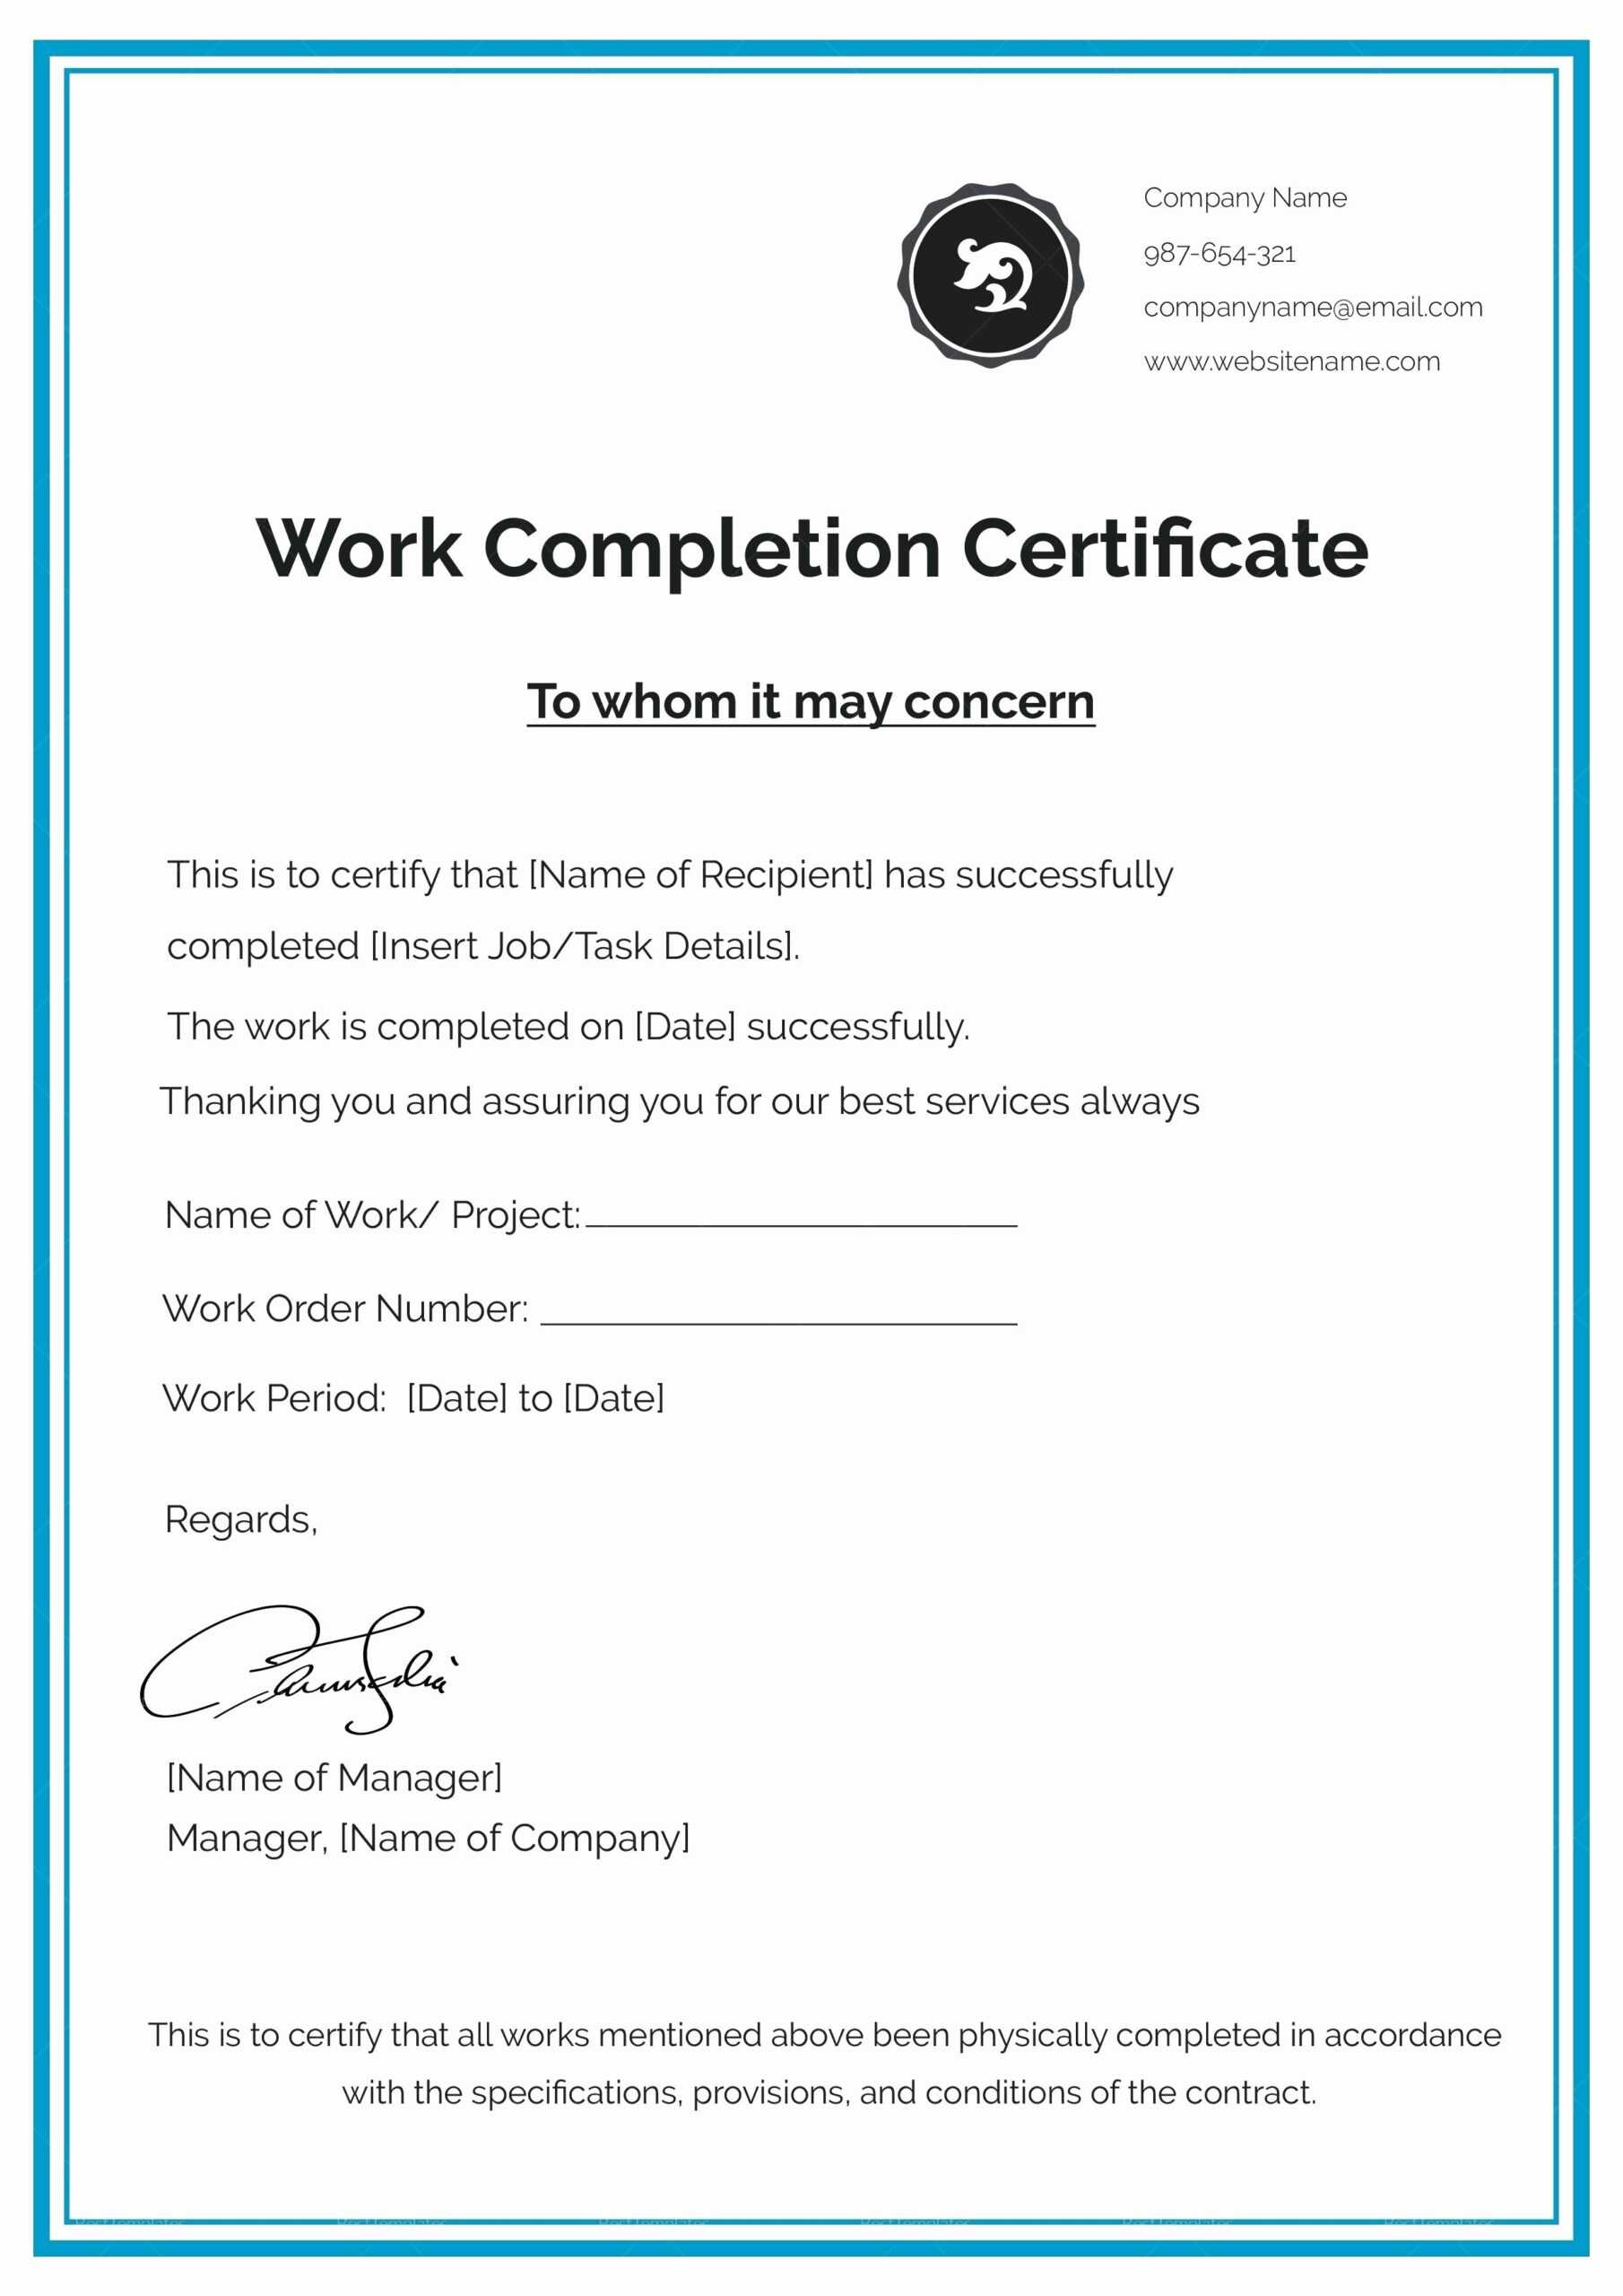 Sample Certificate Of Acceptance And Completion 40 Fantastic Regarding Certificate Of Acceptance Template